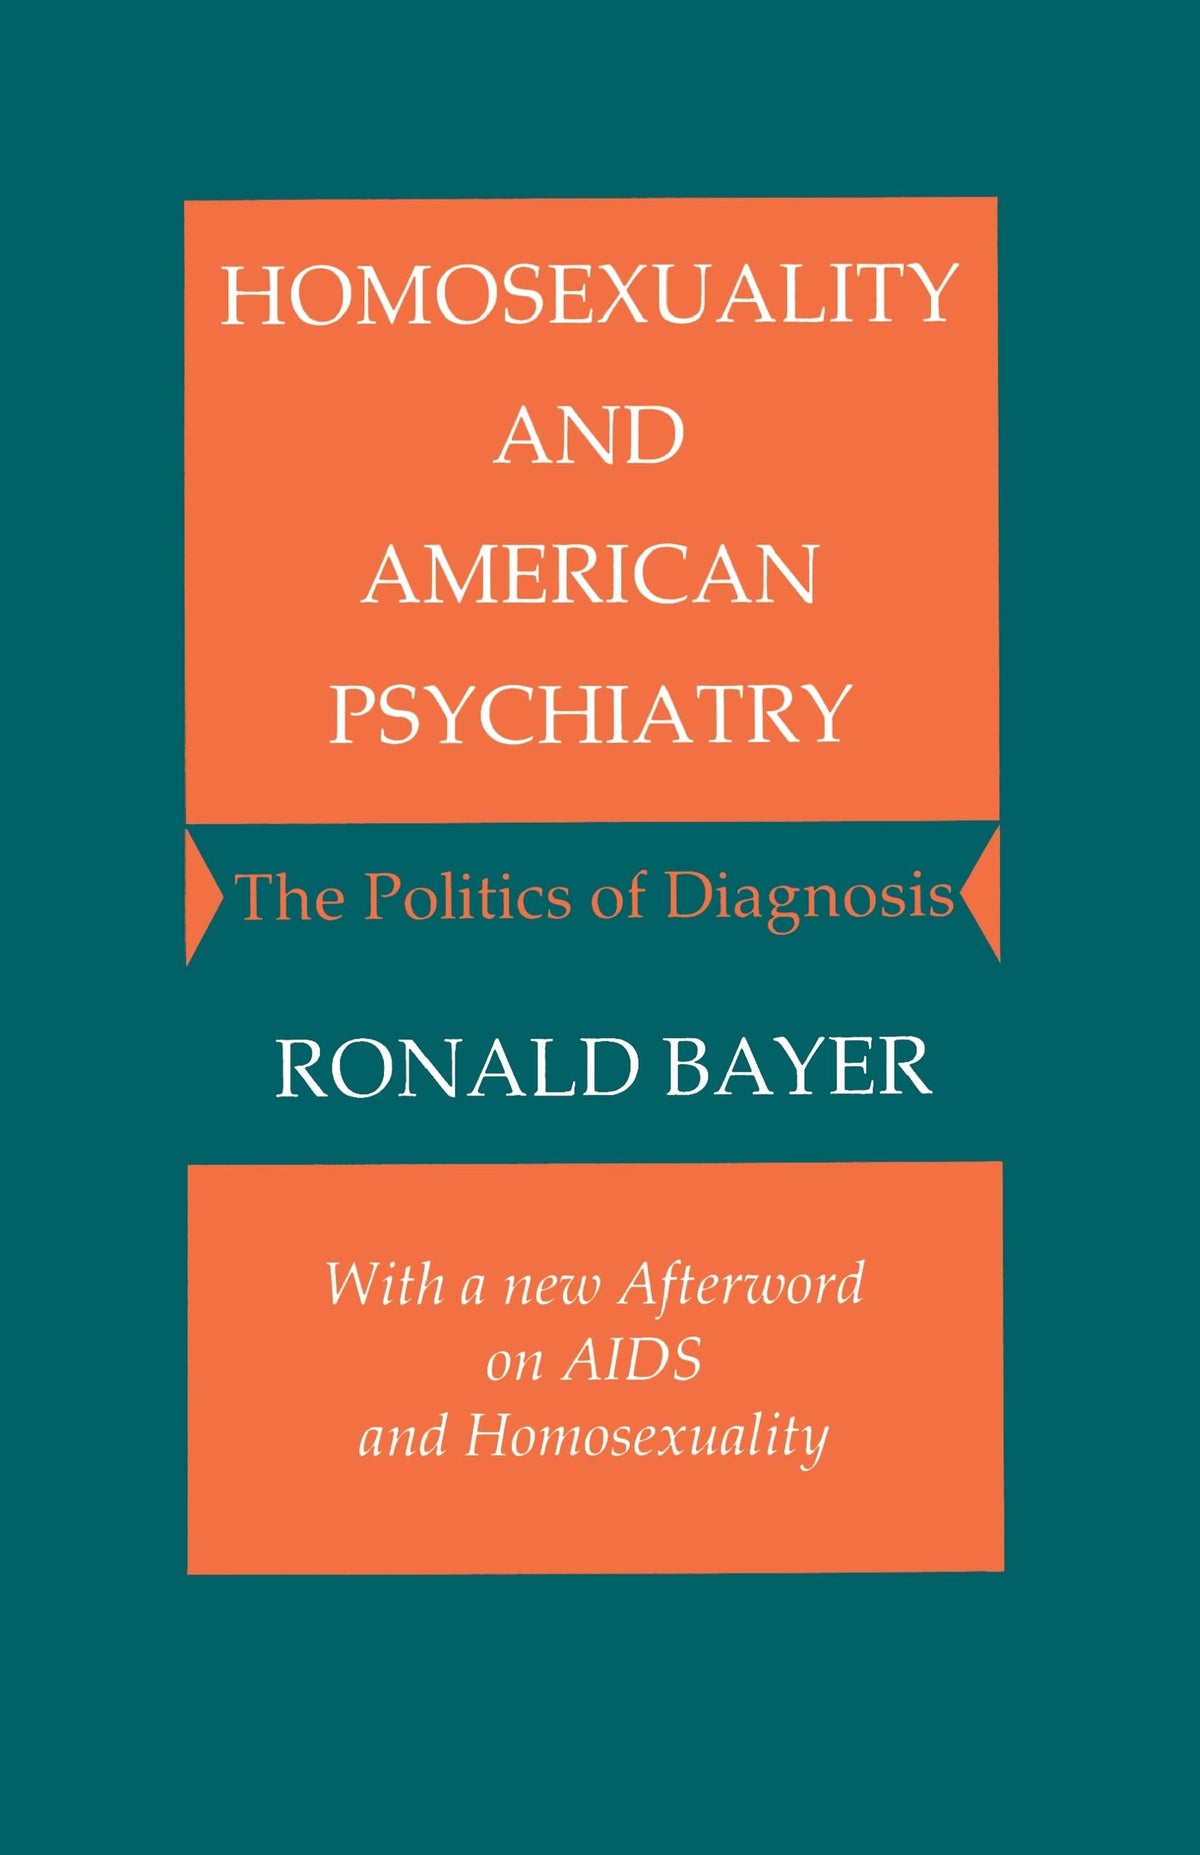 Homosexuality and American Psychiatry: The Politics of Diagnosis (Princeton Paperbacks)